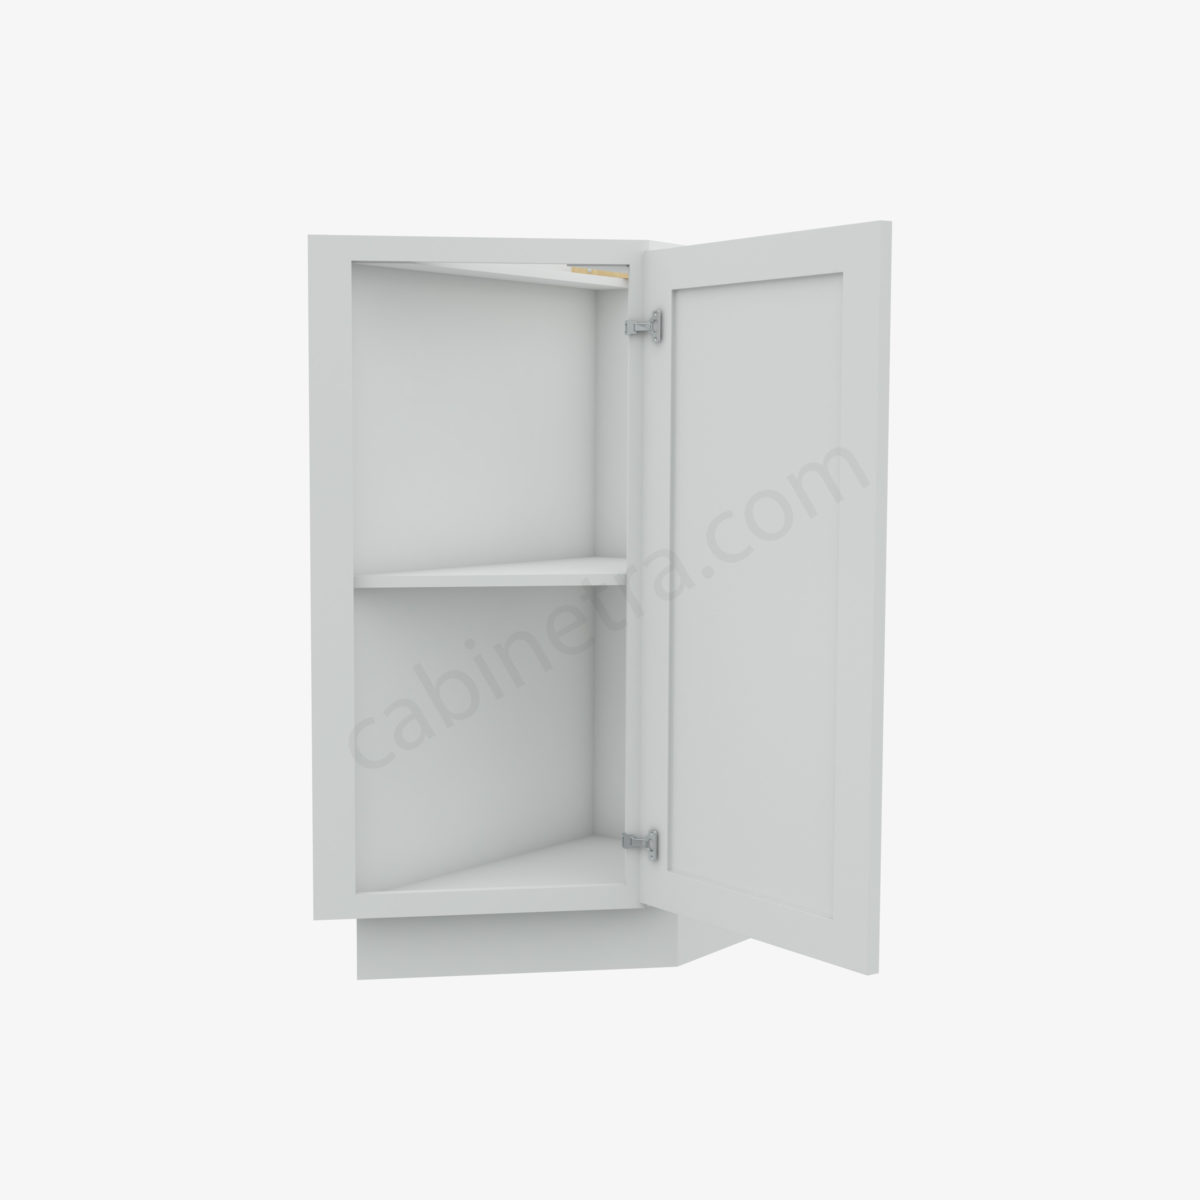 KW BBLC45 48 42W 1  Forevermark K White Cabinetra scaled